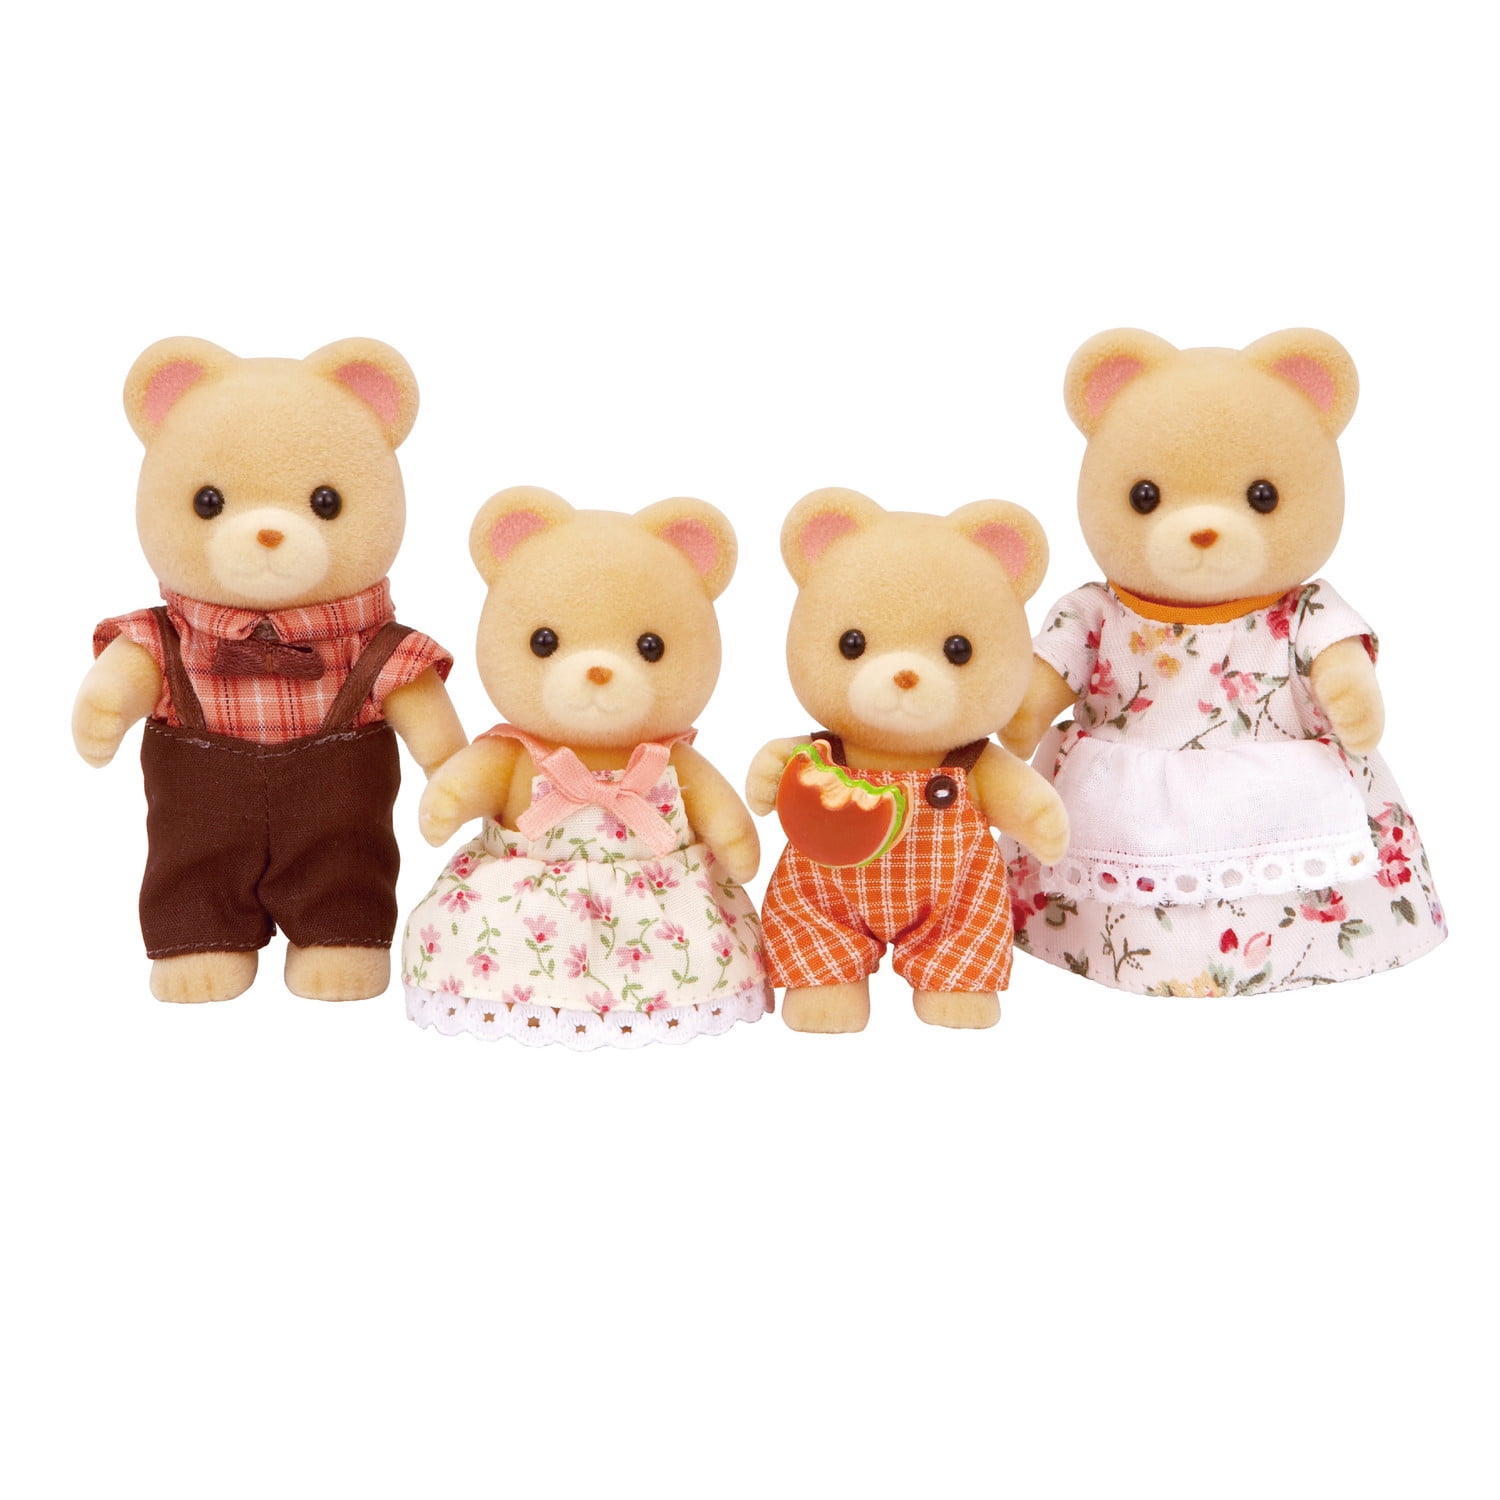 Calico Critters Outback Koala Family 3 Pc Figures Doll Set Mom Dad Baby 